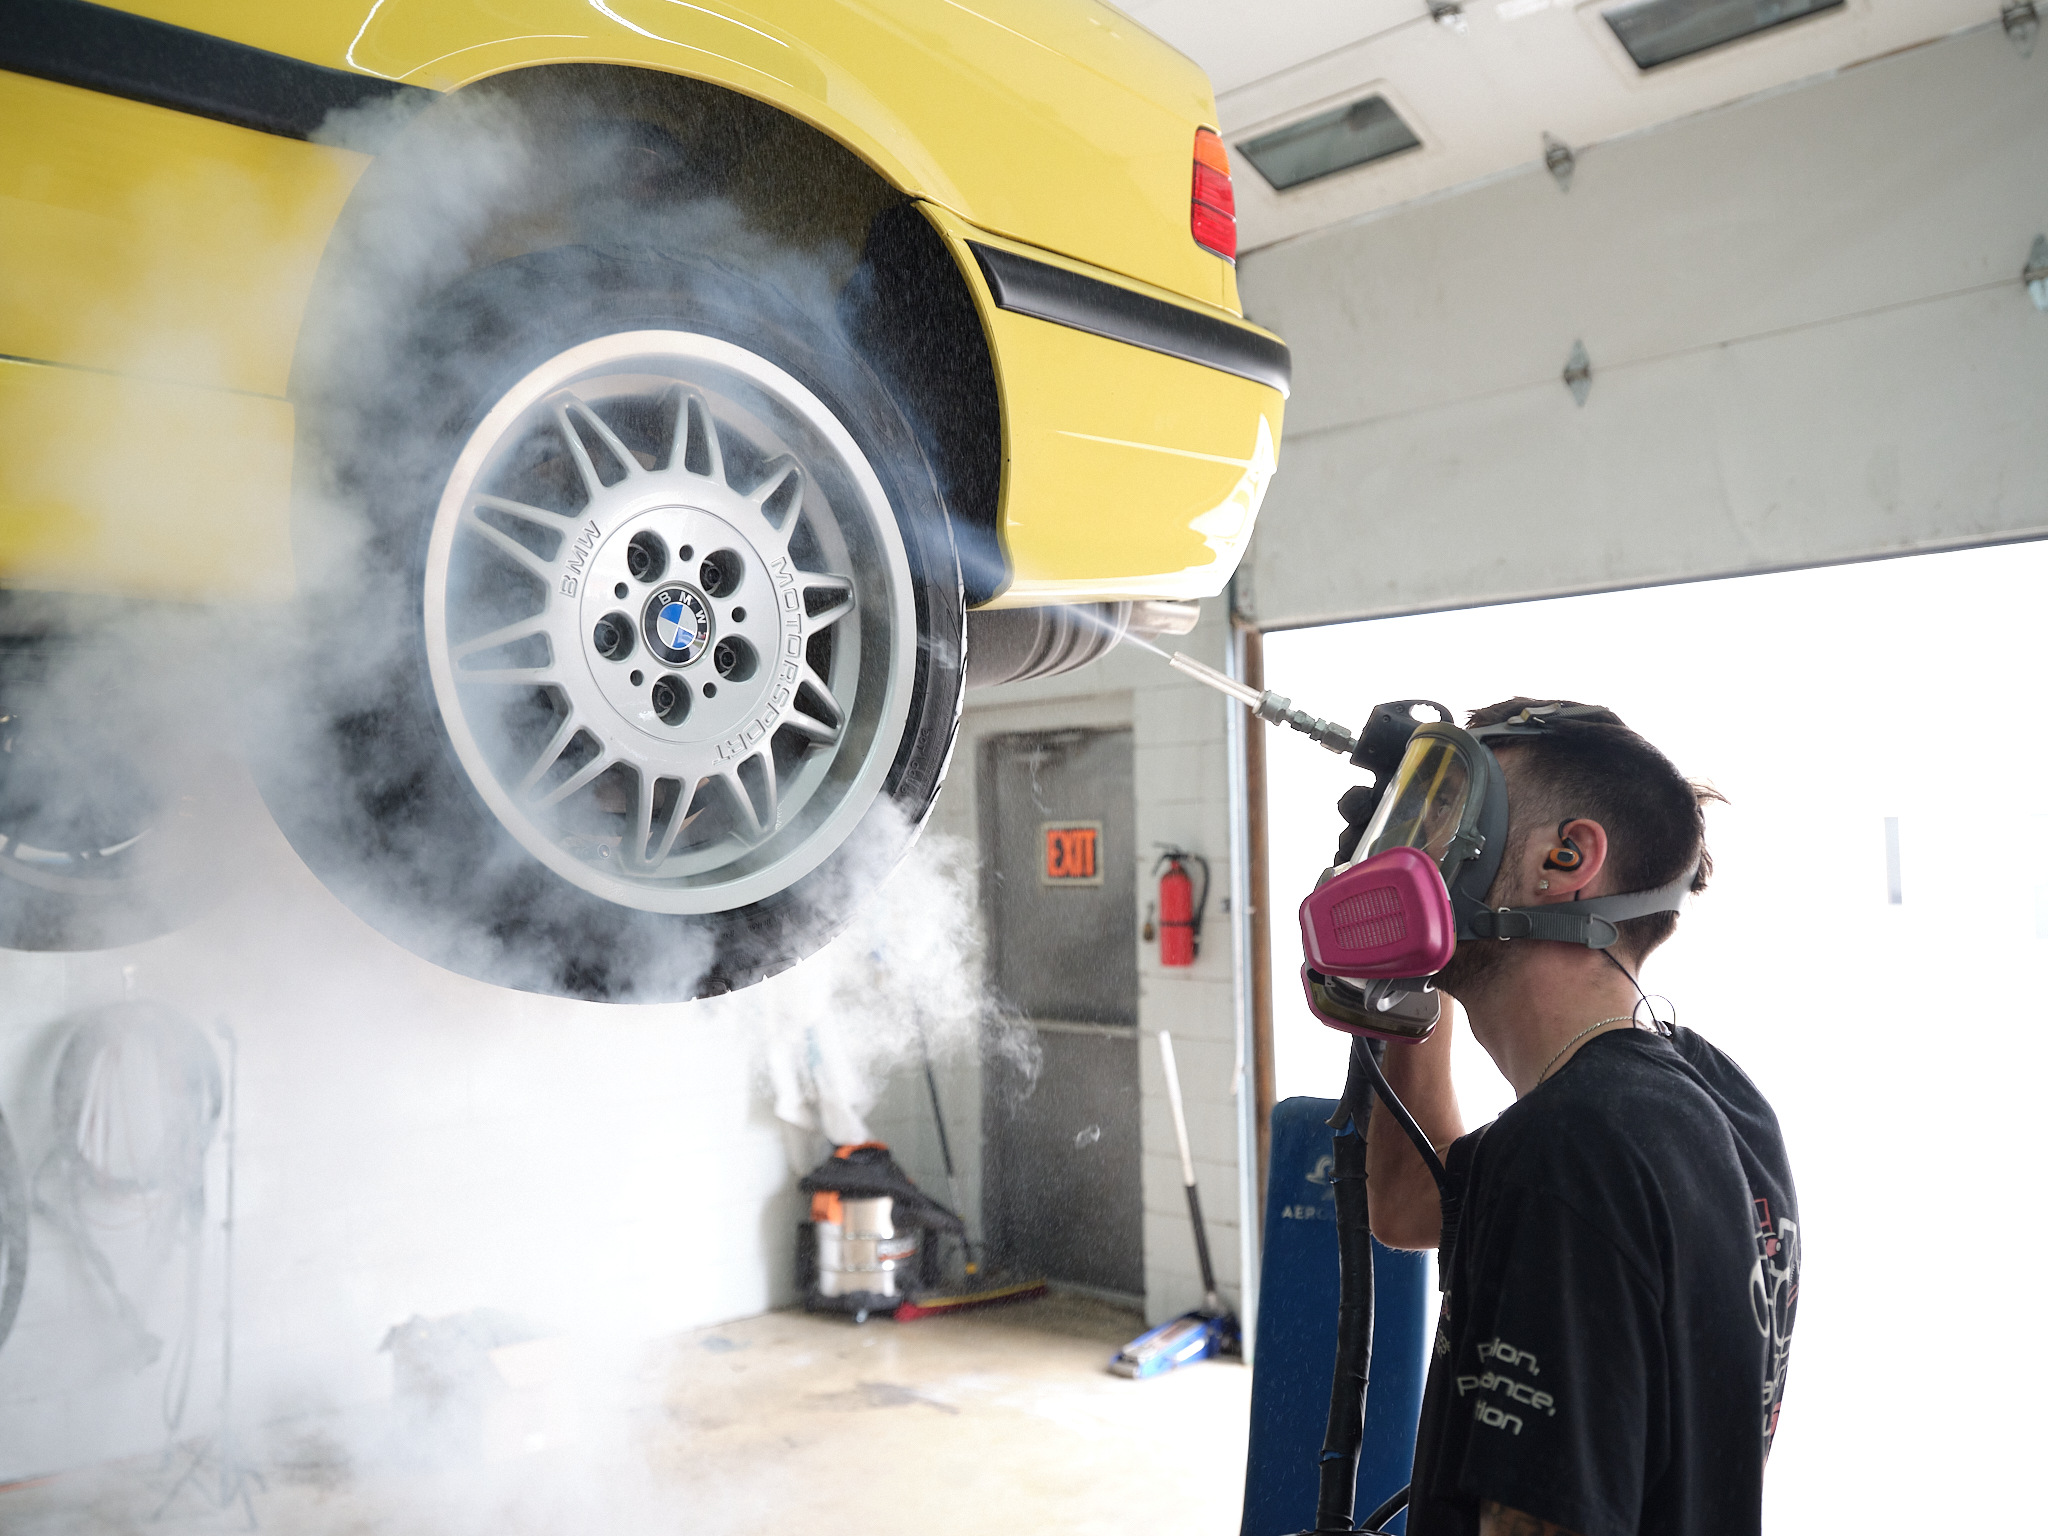 Dry ice cleaning machine is shown in action being used on a car wheel in a shop